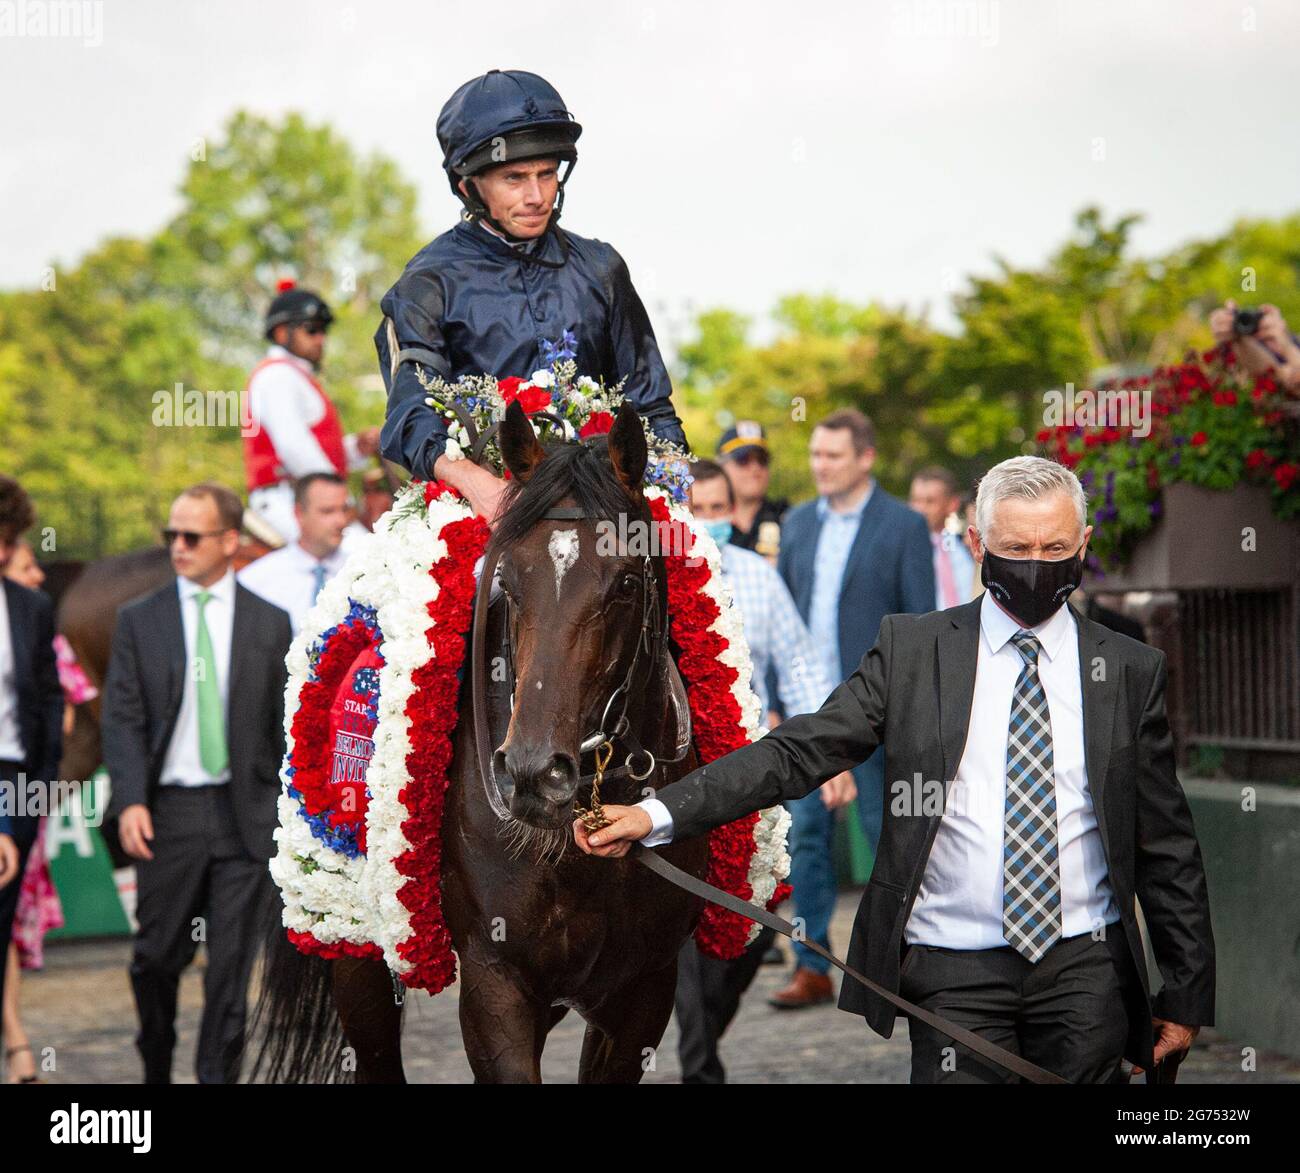 Bolshoi Ballet (IRE), ridden by Ryan Moore, wins the 2021 running of the G1 Belmont Derby at Belmont Park in Elmont, NY on July 10, 2021. (Photo by Sophie Shore/Eclipse Sportswire/CSM/Sipa USA) Stock Photo